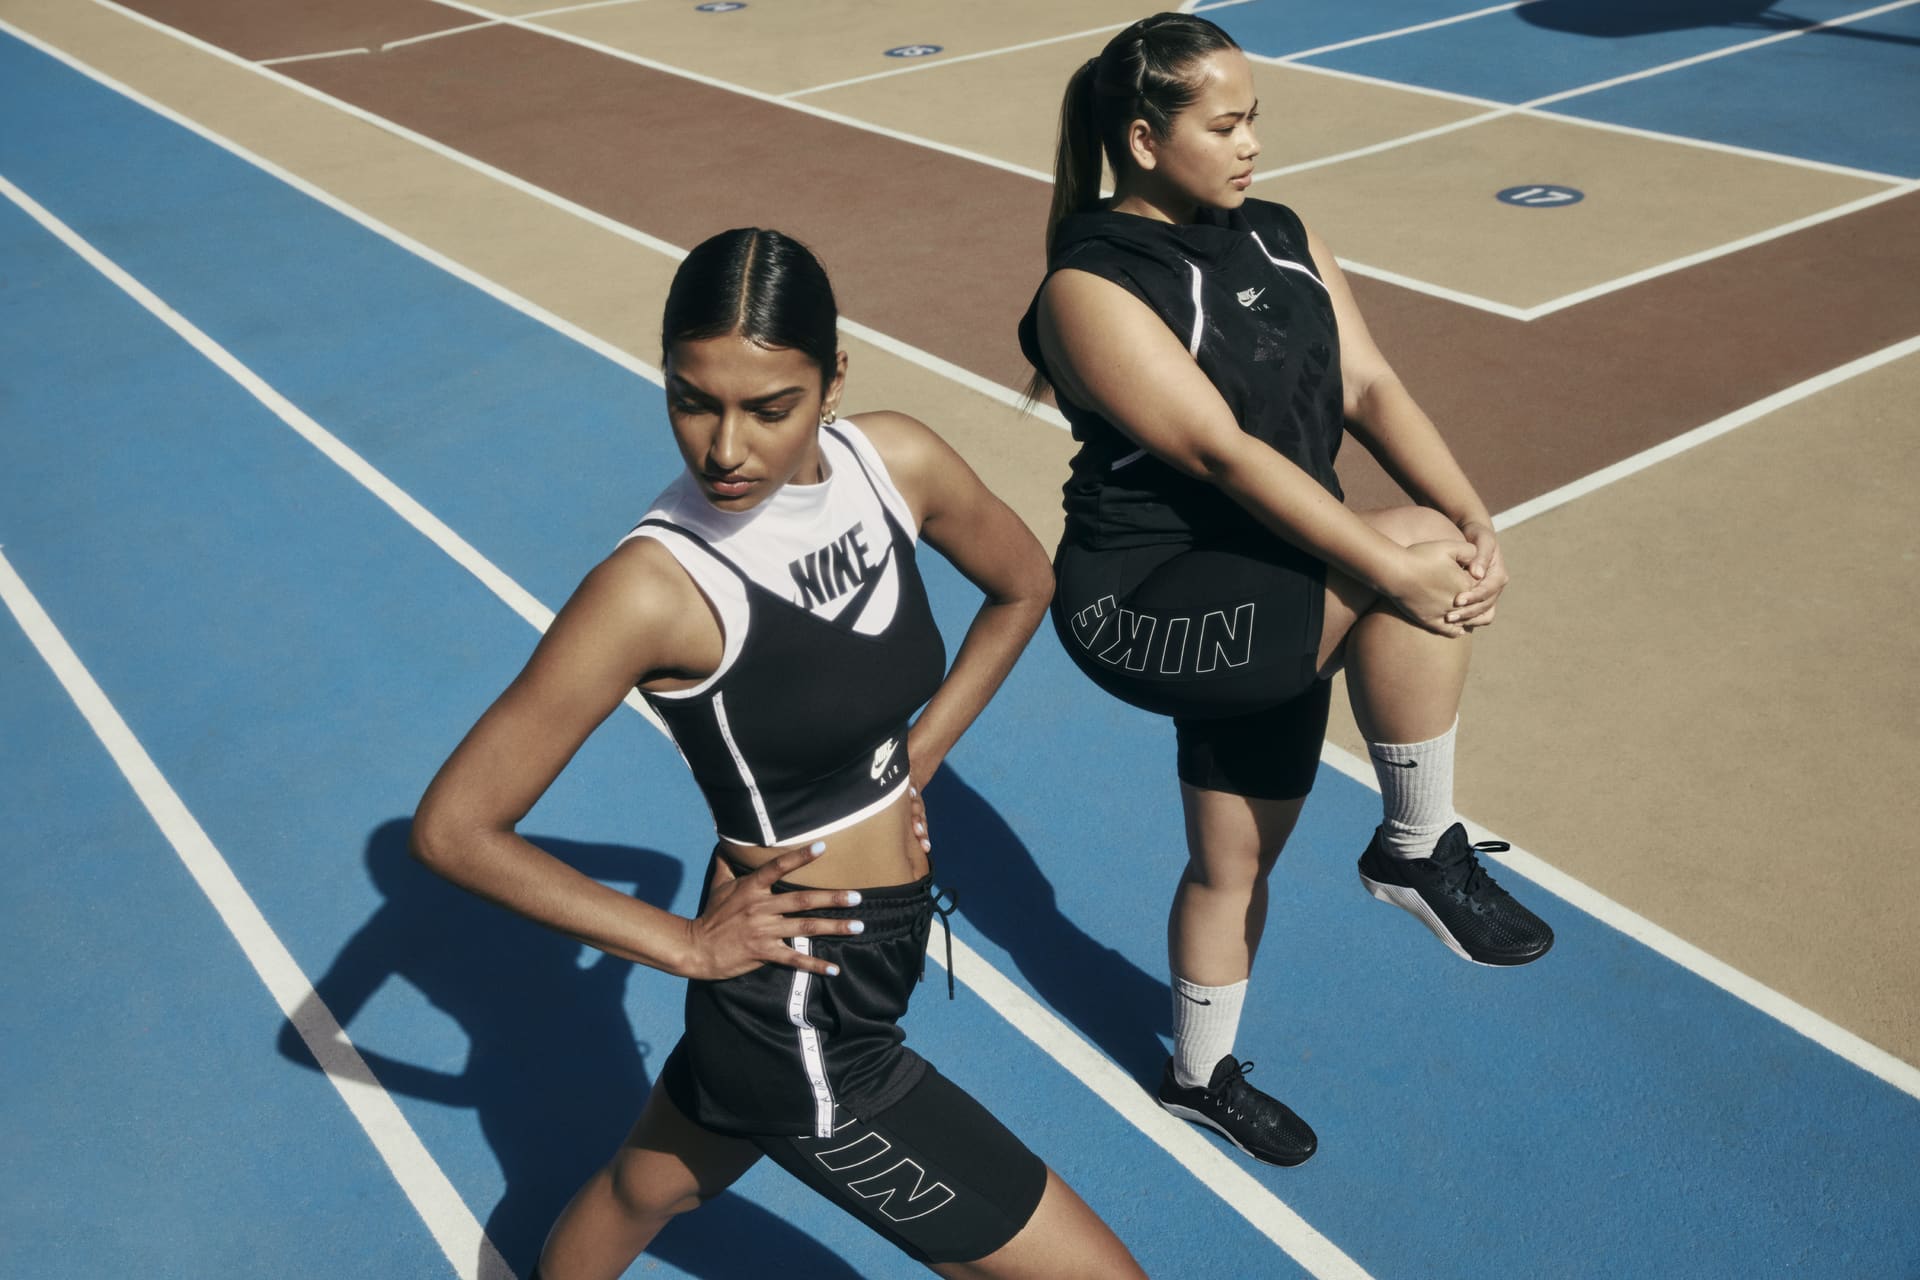 nike heart rate monitor vest